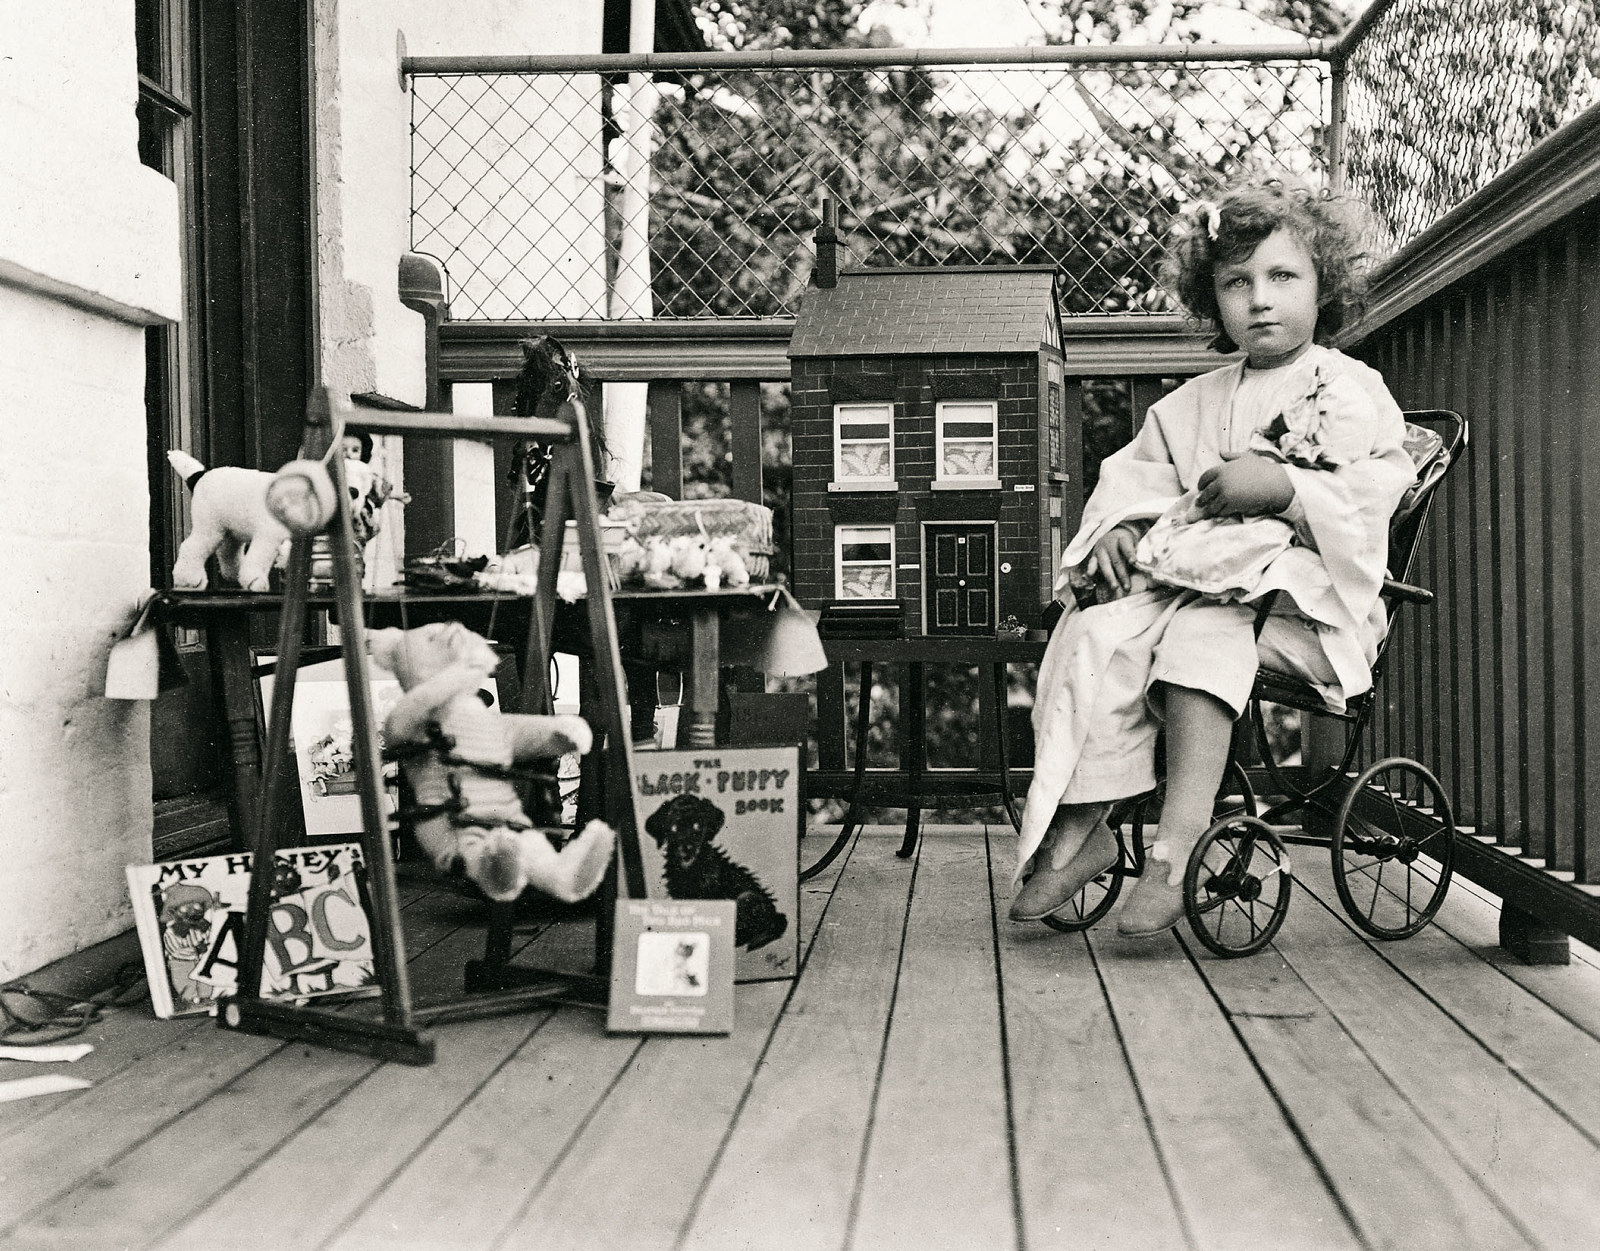 Young girl sits on a chair with wheels on a verandah. She is surrounded by toys including a dolls house and fluffy toy elephant. She holds a teddy bear.